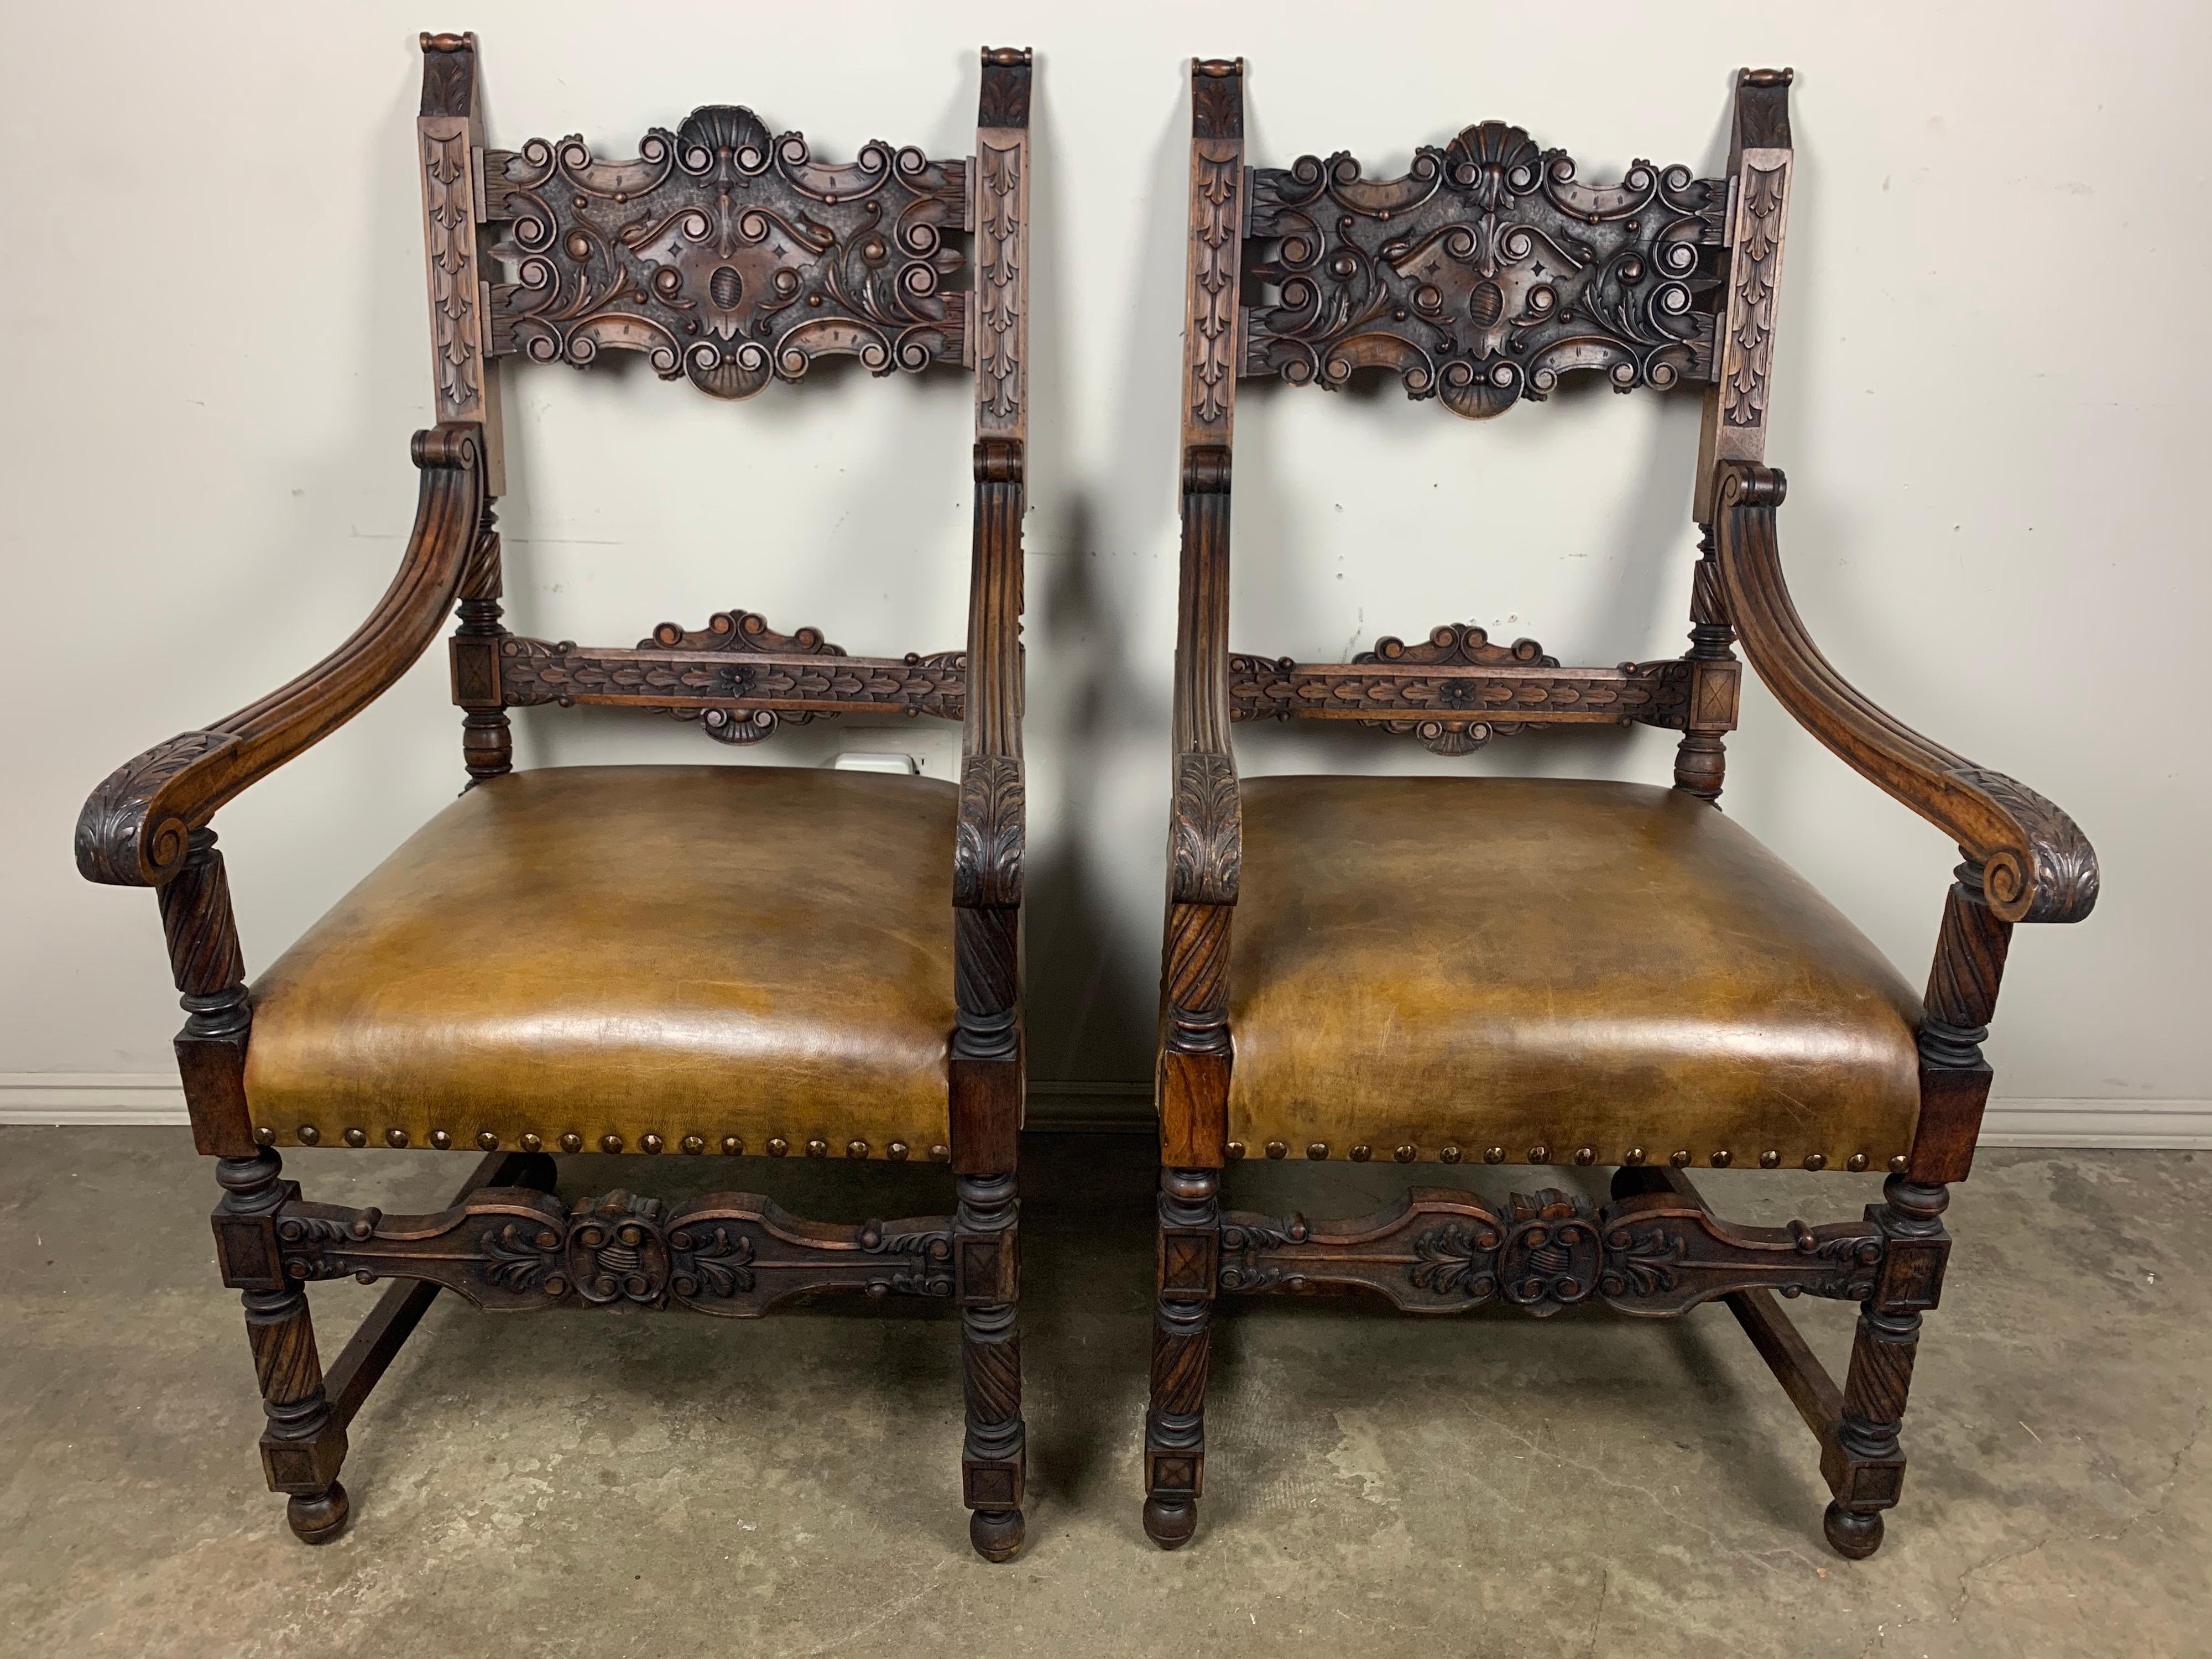 Pair of walnut carved Spanish armchairs upholstered in a chestnut brown coloration with antique brass nails.